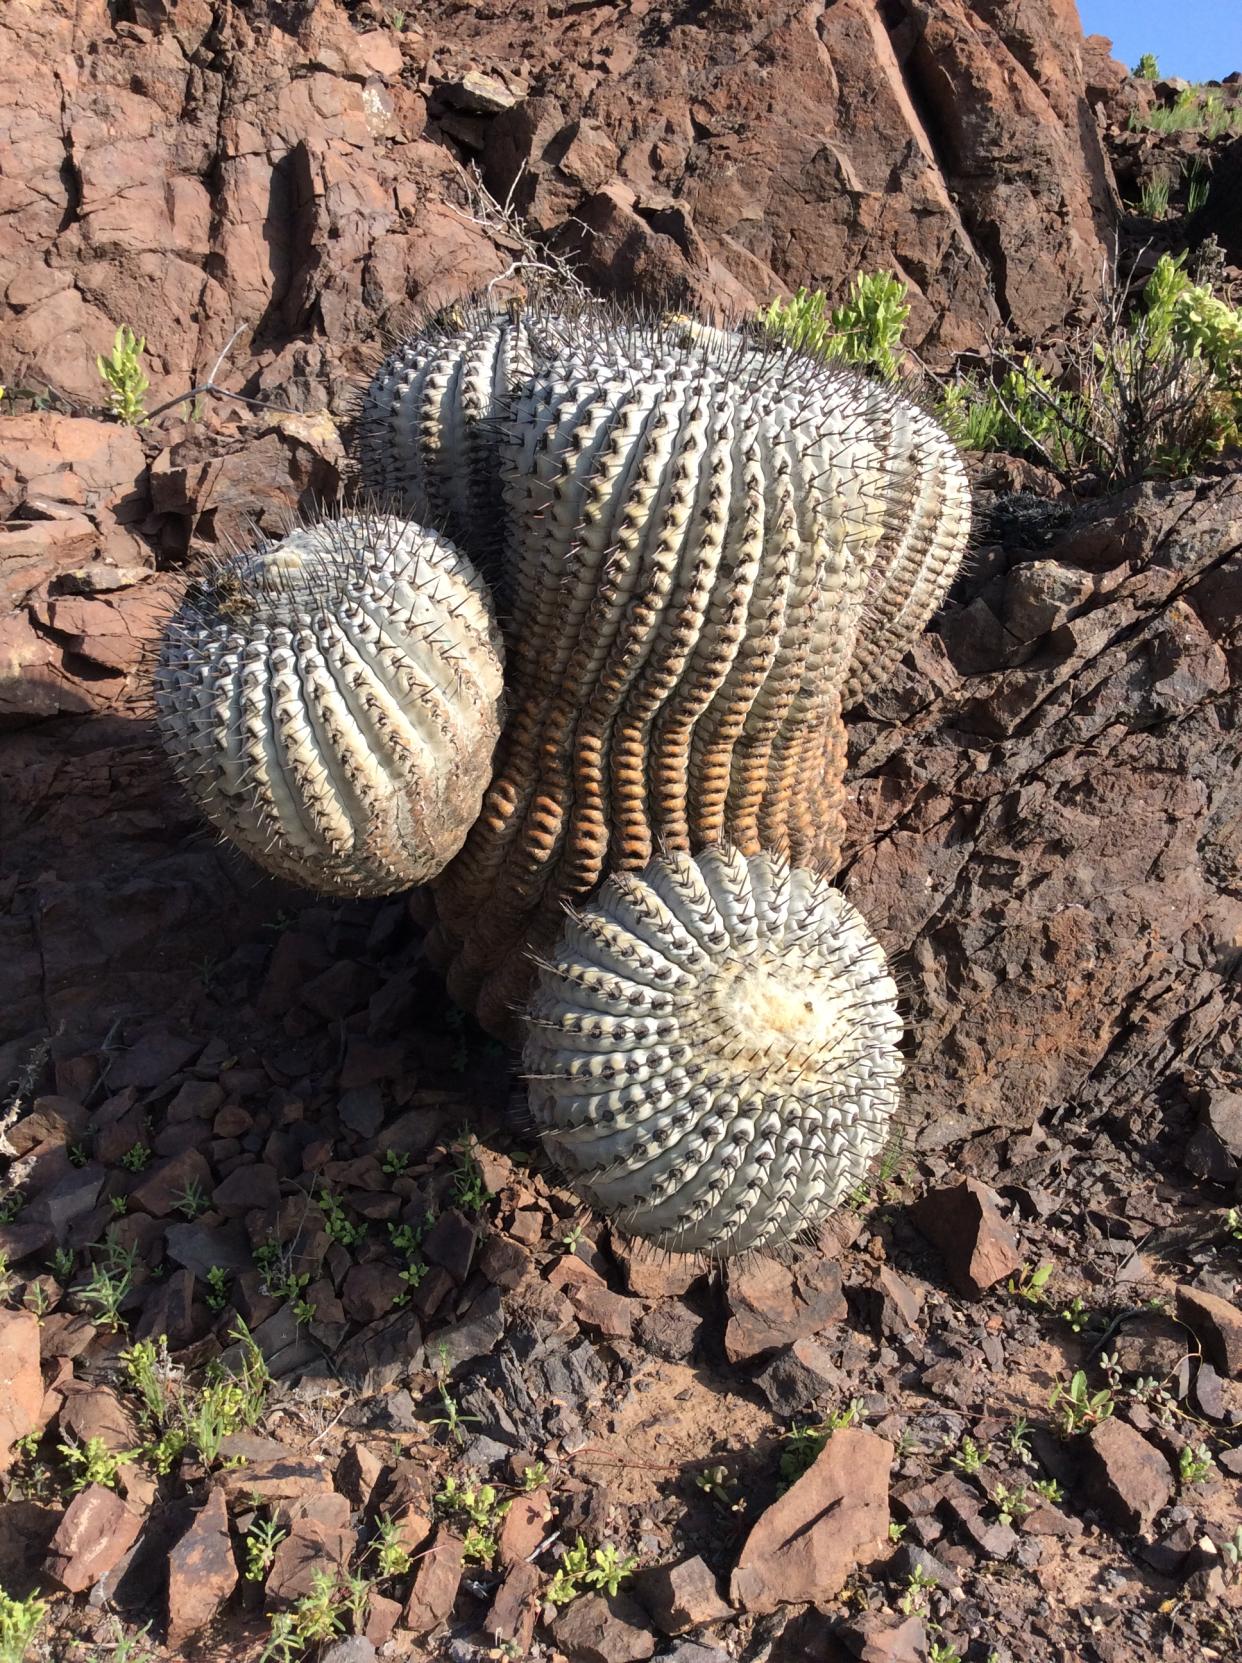 A close up of one the endangered Copiapoa cacti in its desert habitat